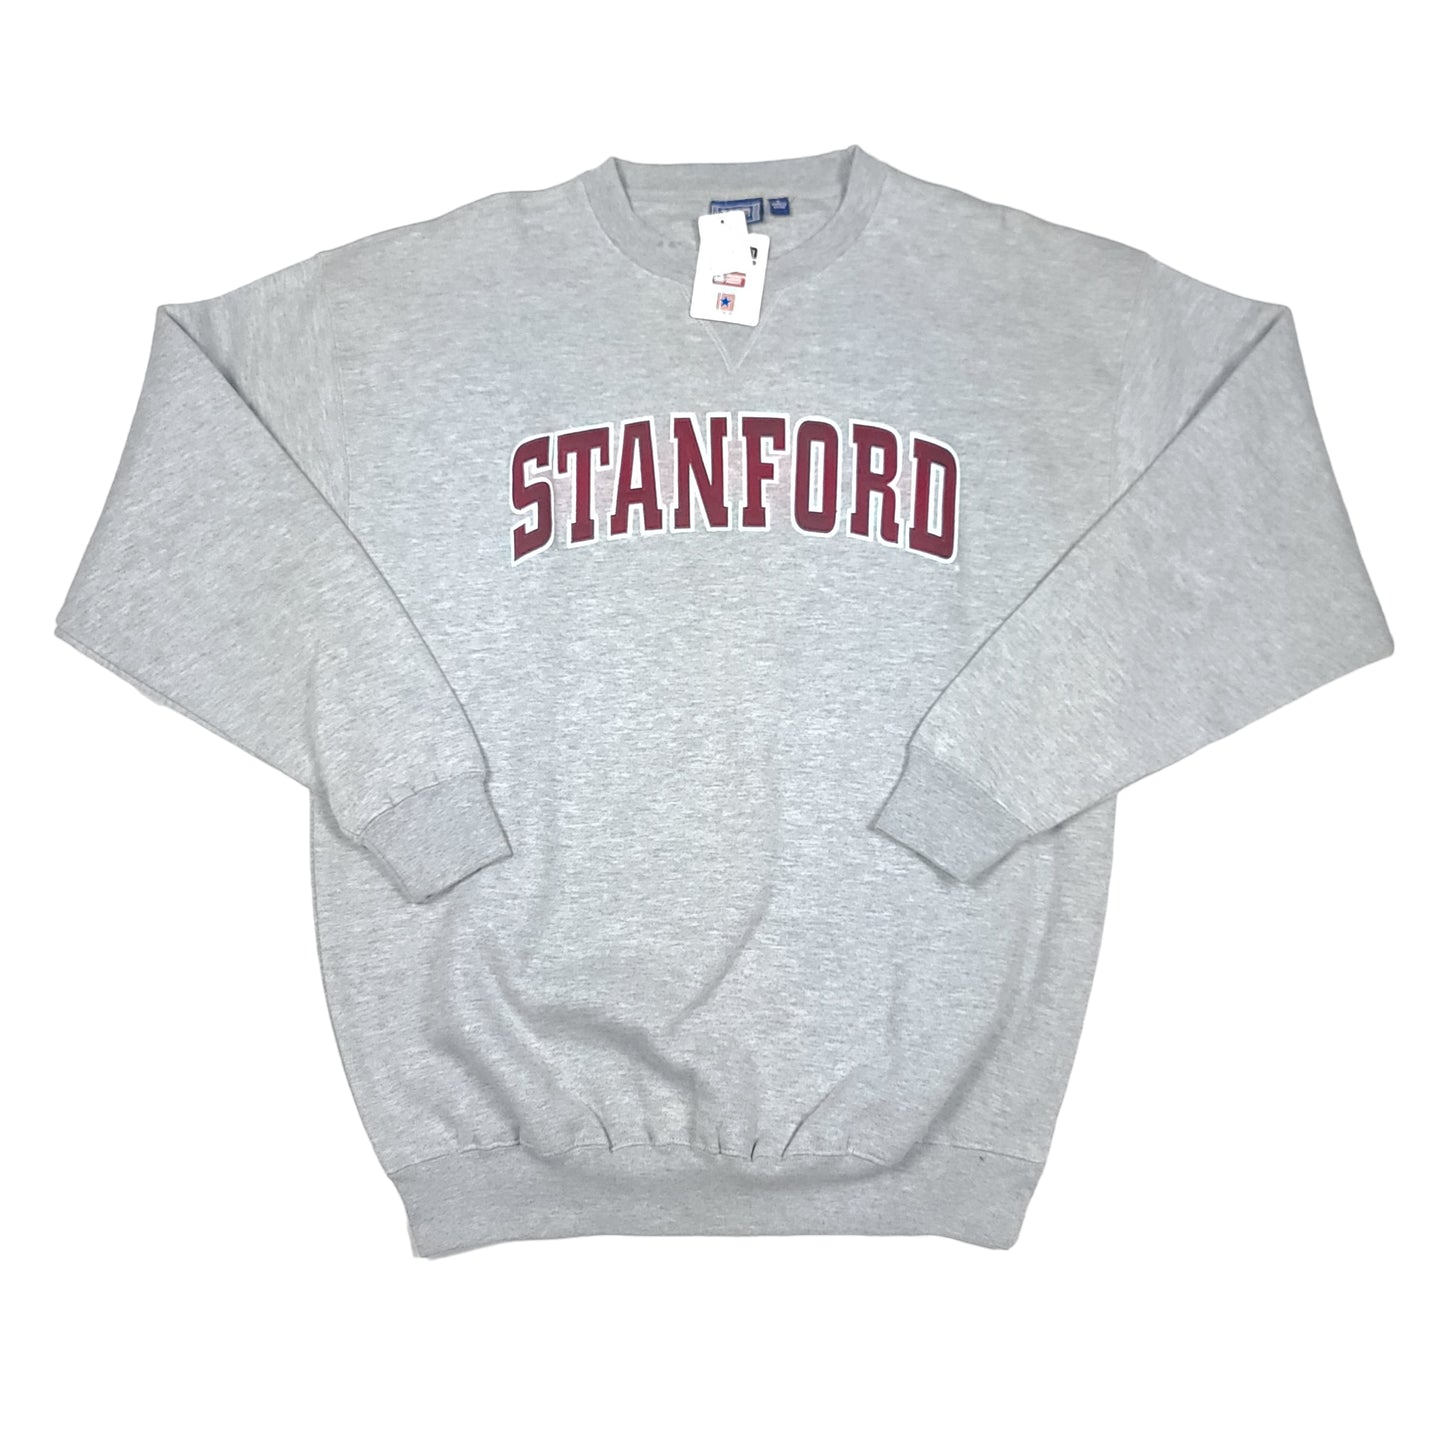 Stanford University Gray Sweatshirt (New with Tags)